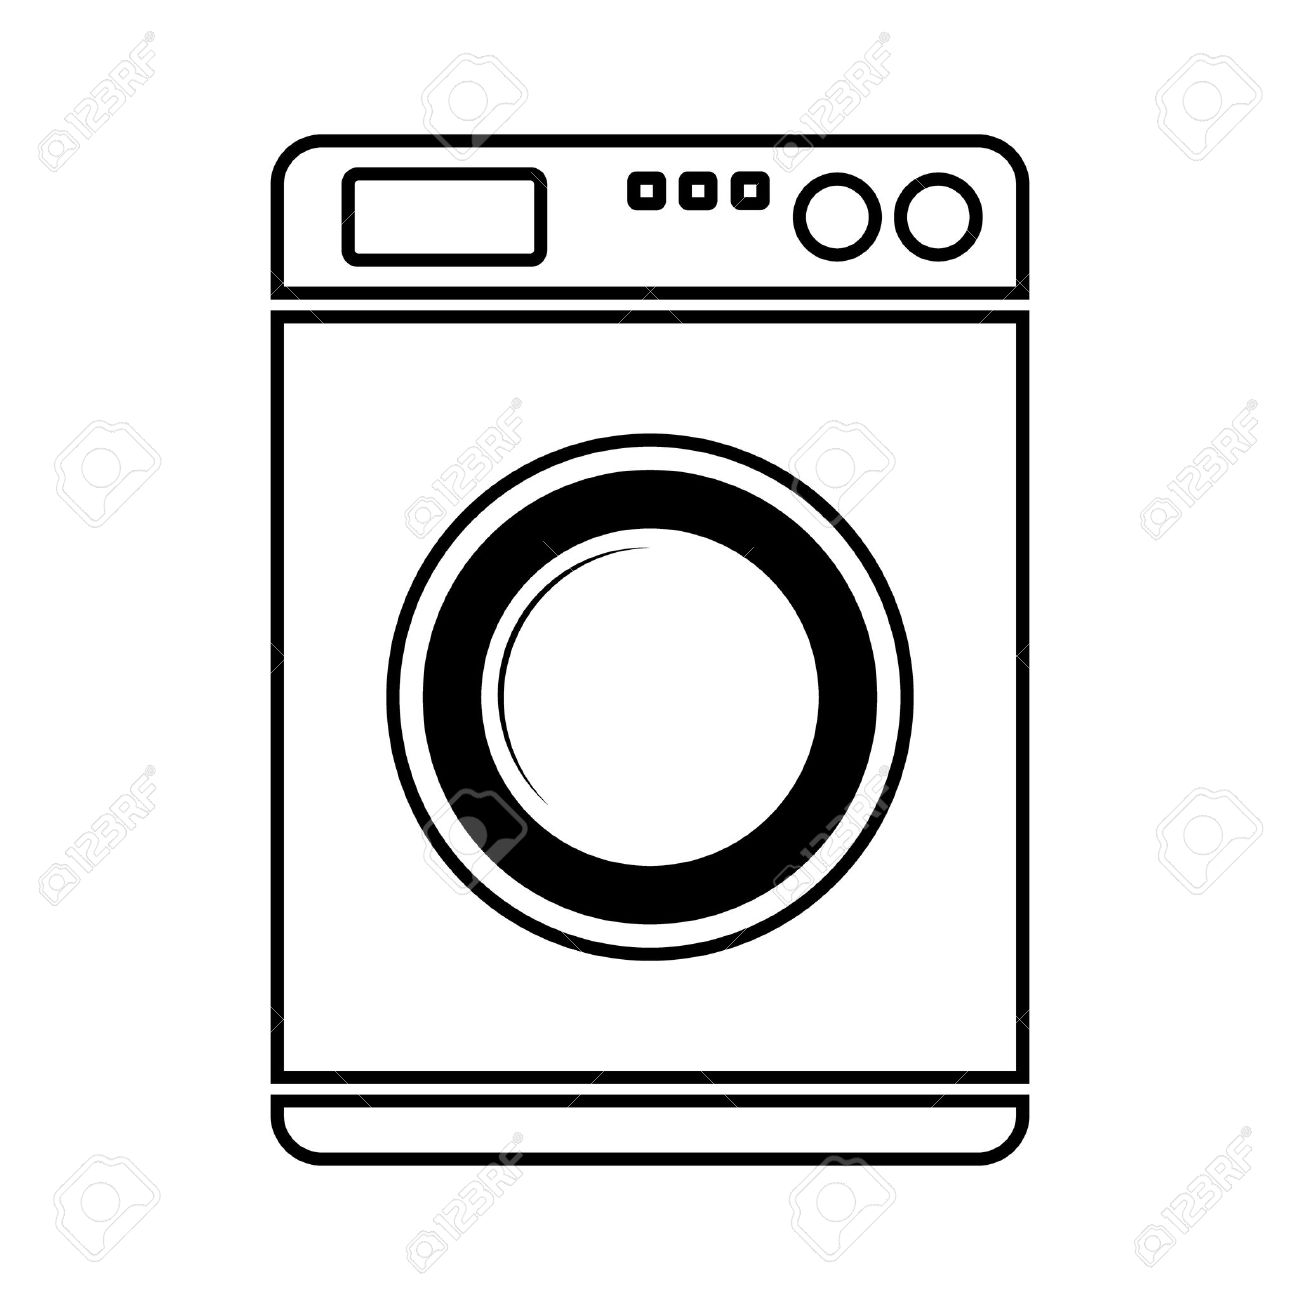 clothes washer clipart - photo #41